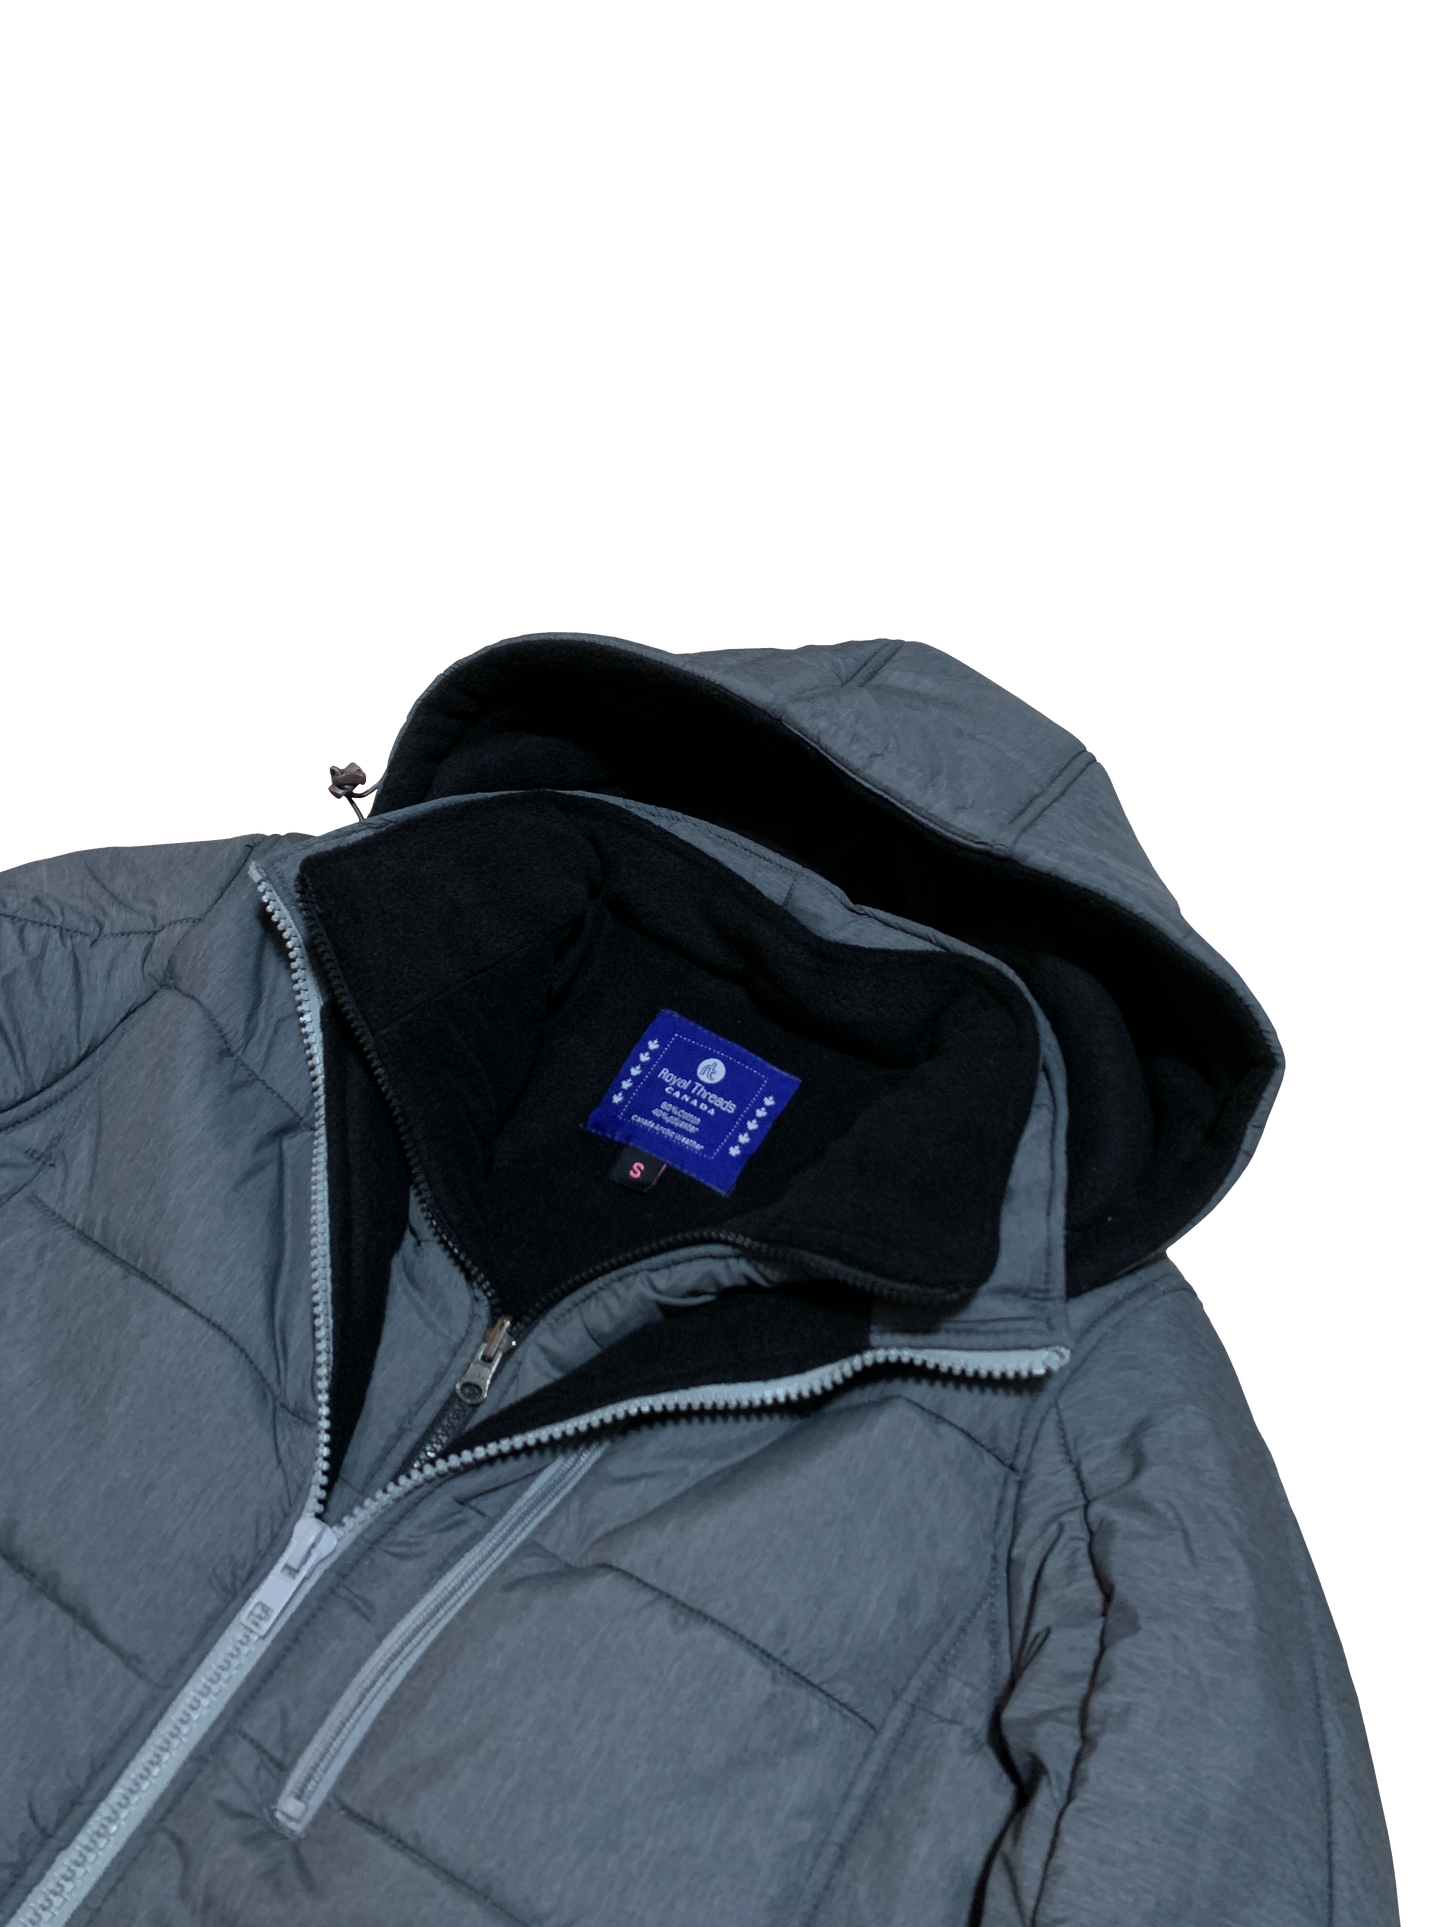 Men's Heavy Padded Full Fleece Insulated Jacket Negative Degree Canadian Winter Weather Coat with Removable Hood